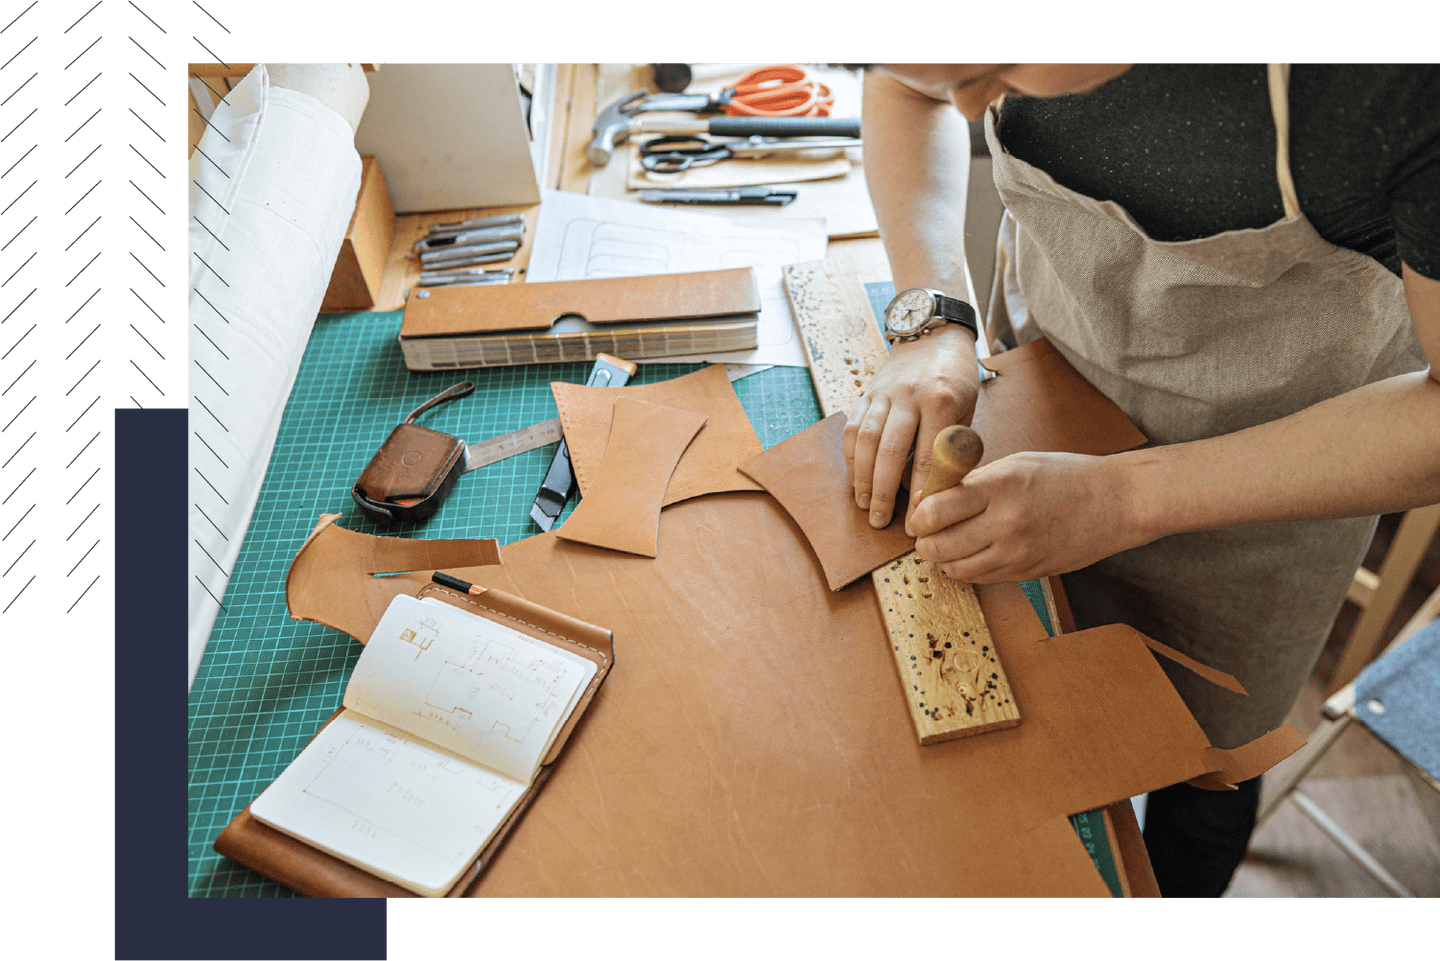 Person cutting and carving pieces of leather